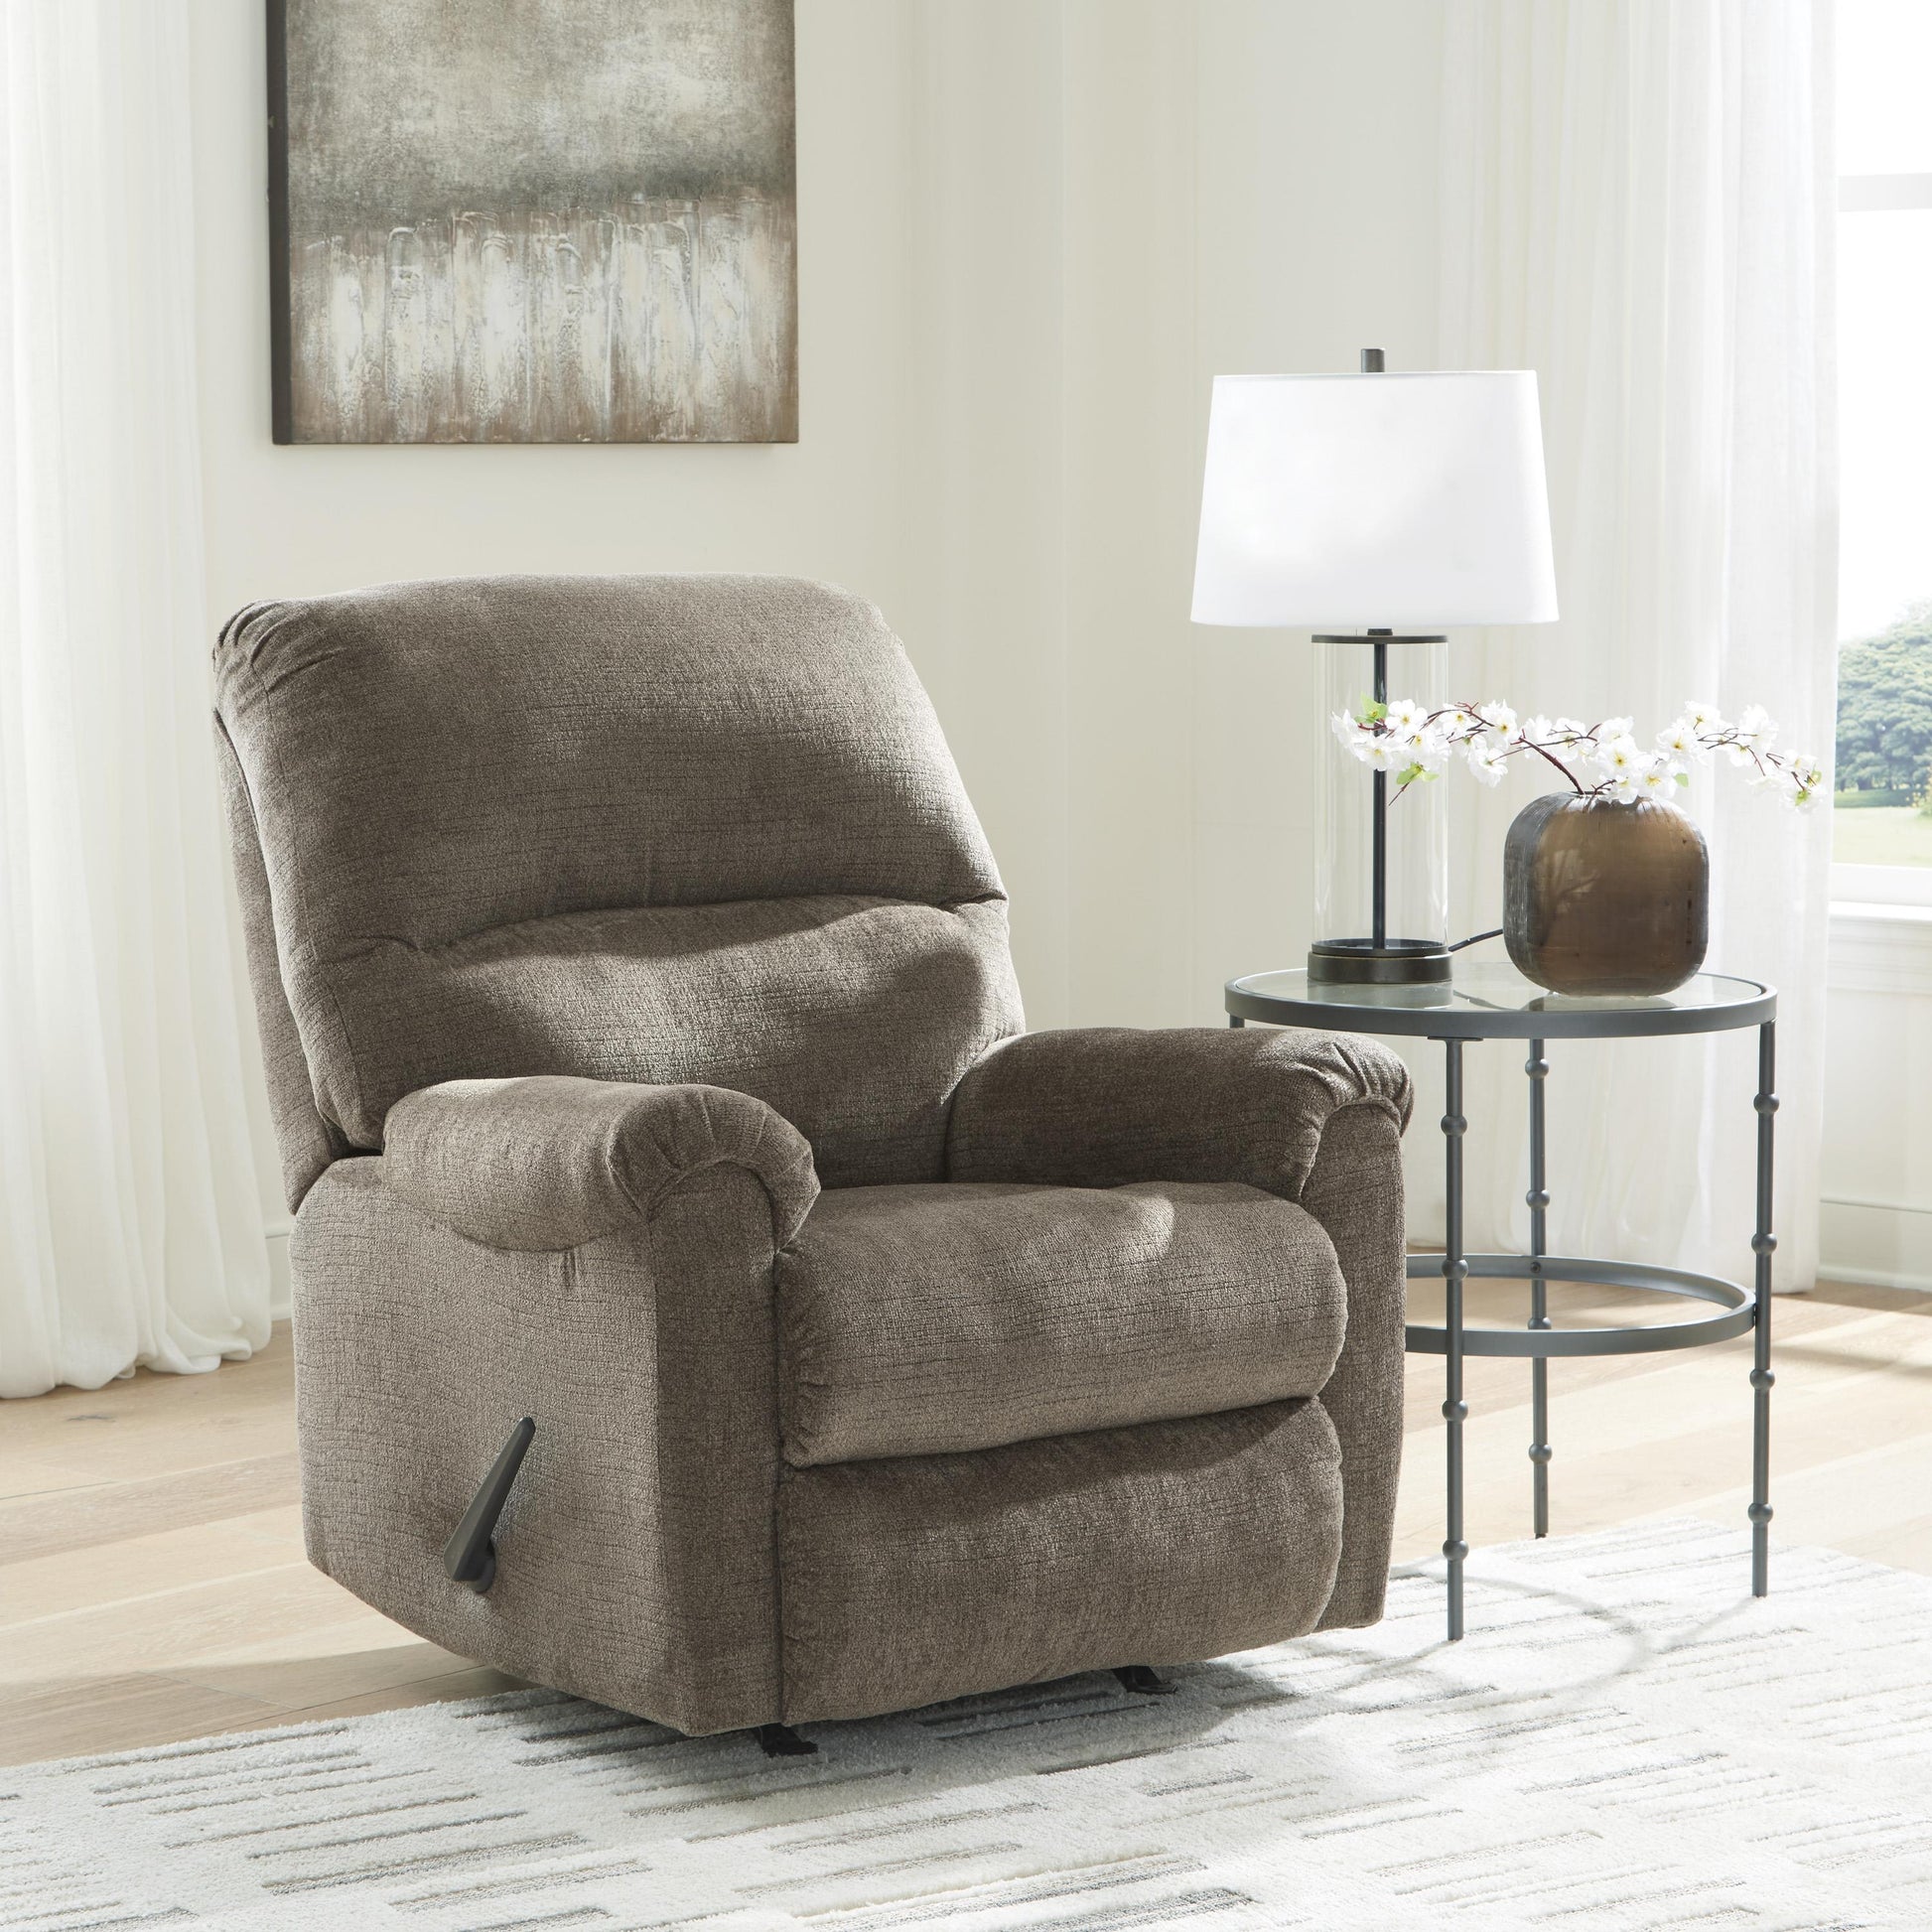 Signature Design by Ashley Recliners Manual 5950525 IMAGE 6